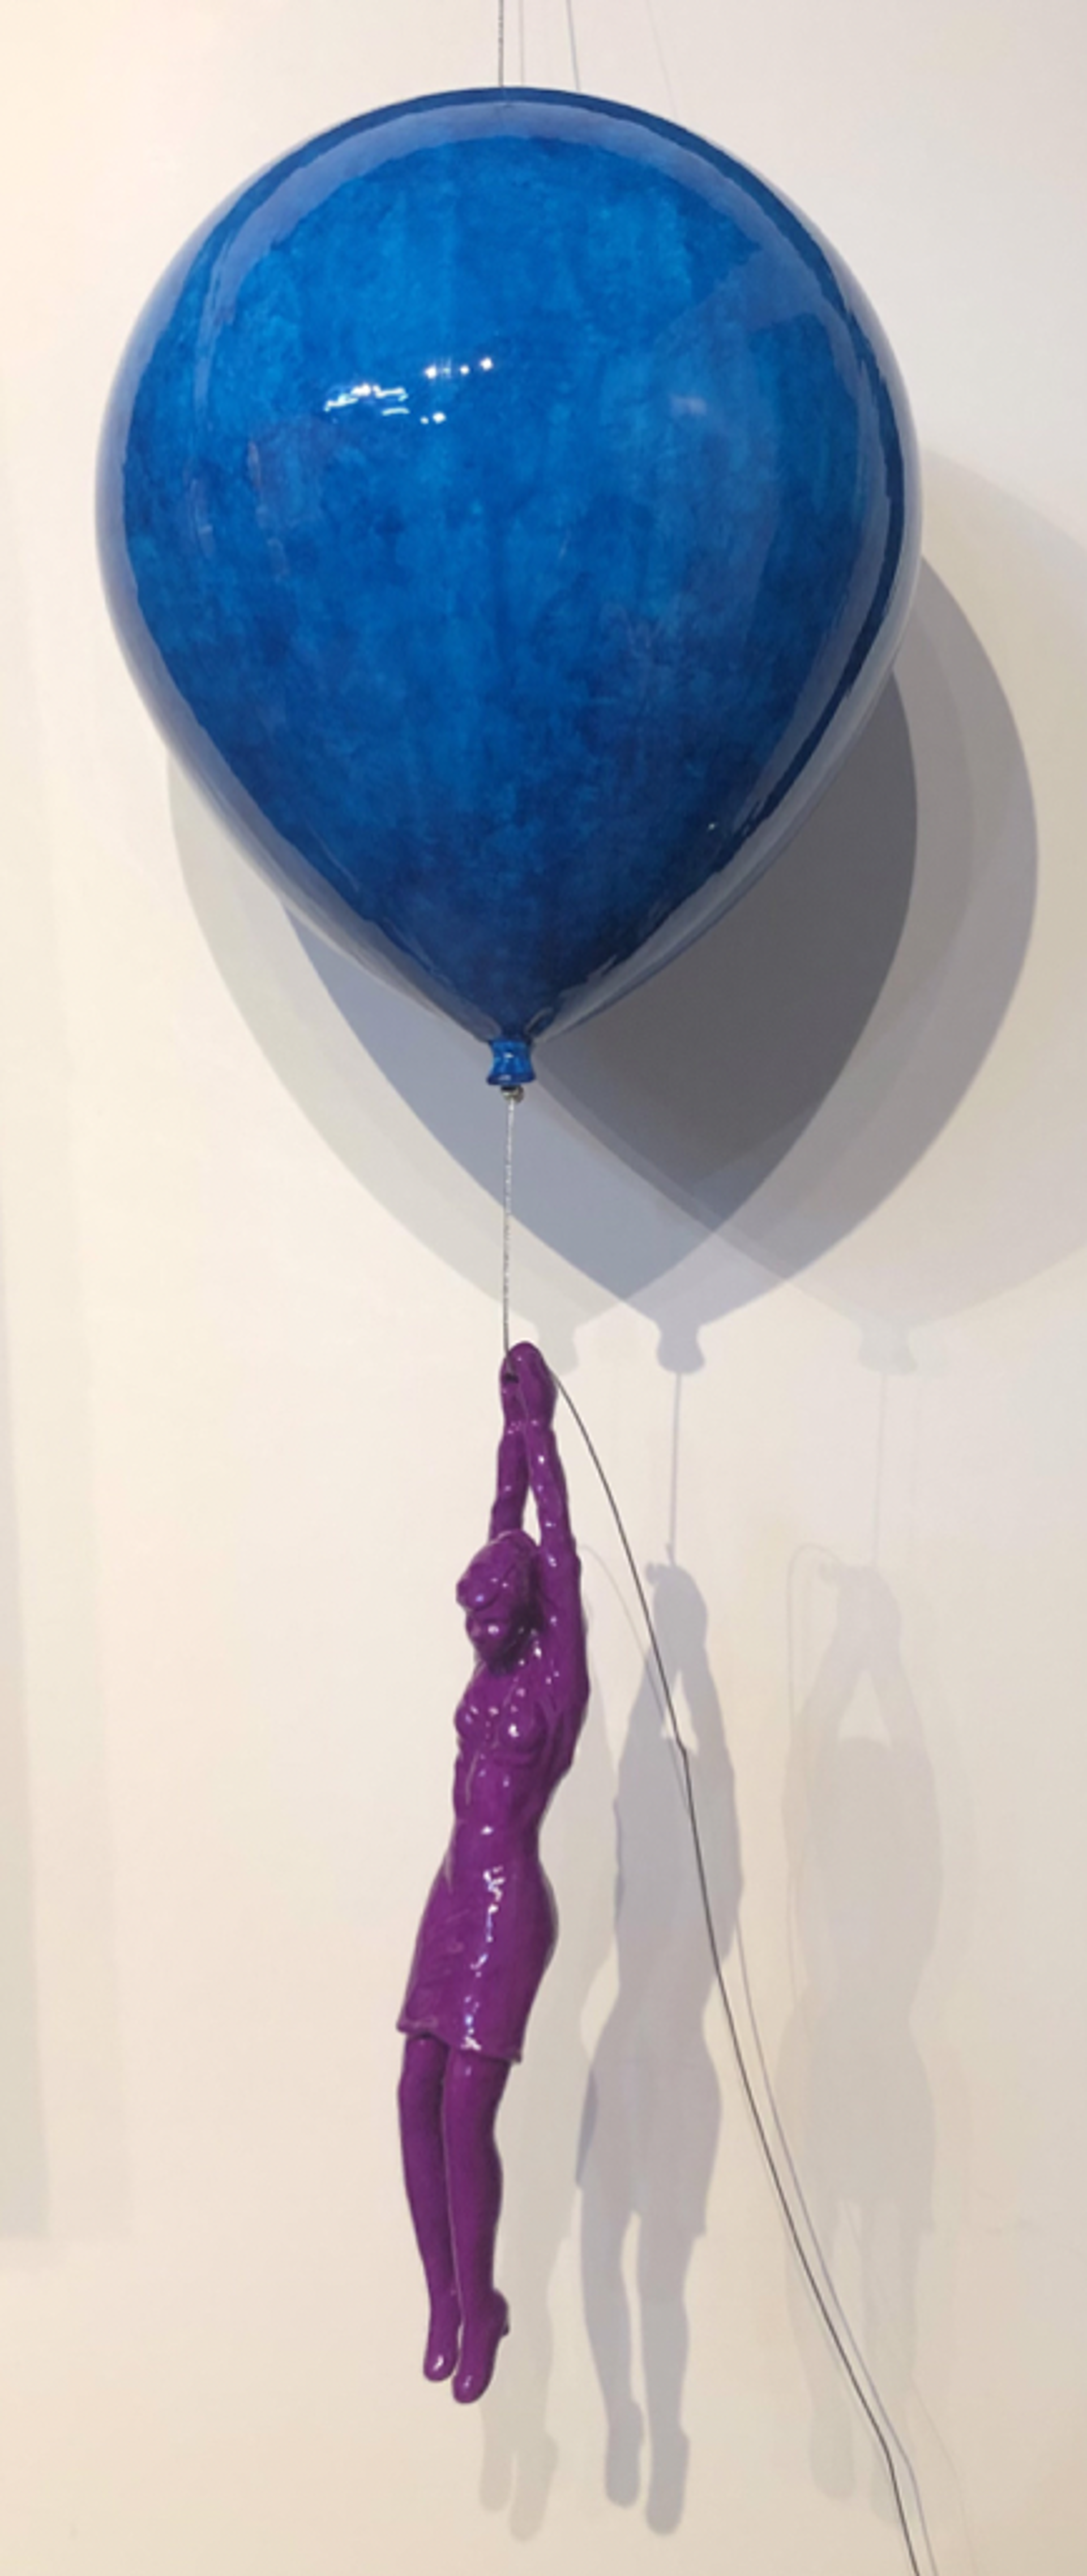 Balloon with Business Woman (Blue/Purple) by Ancizar Marin